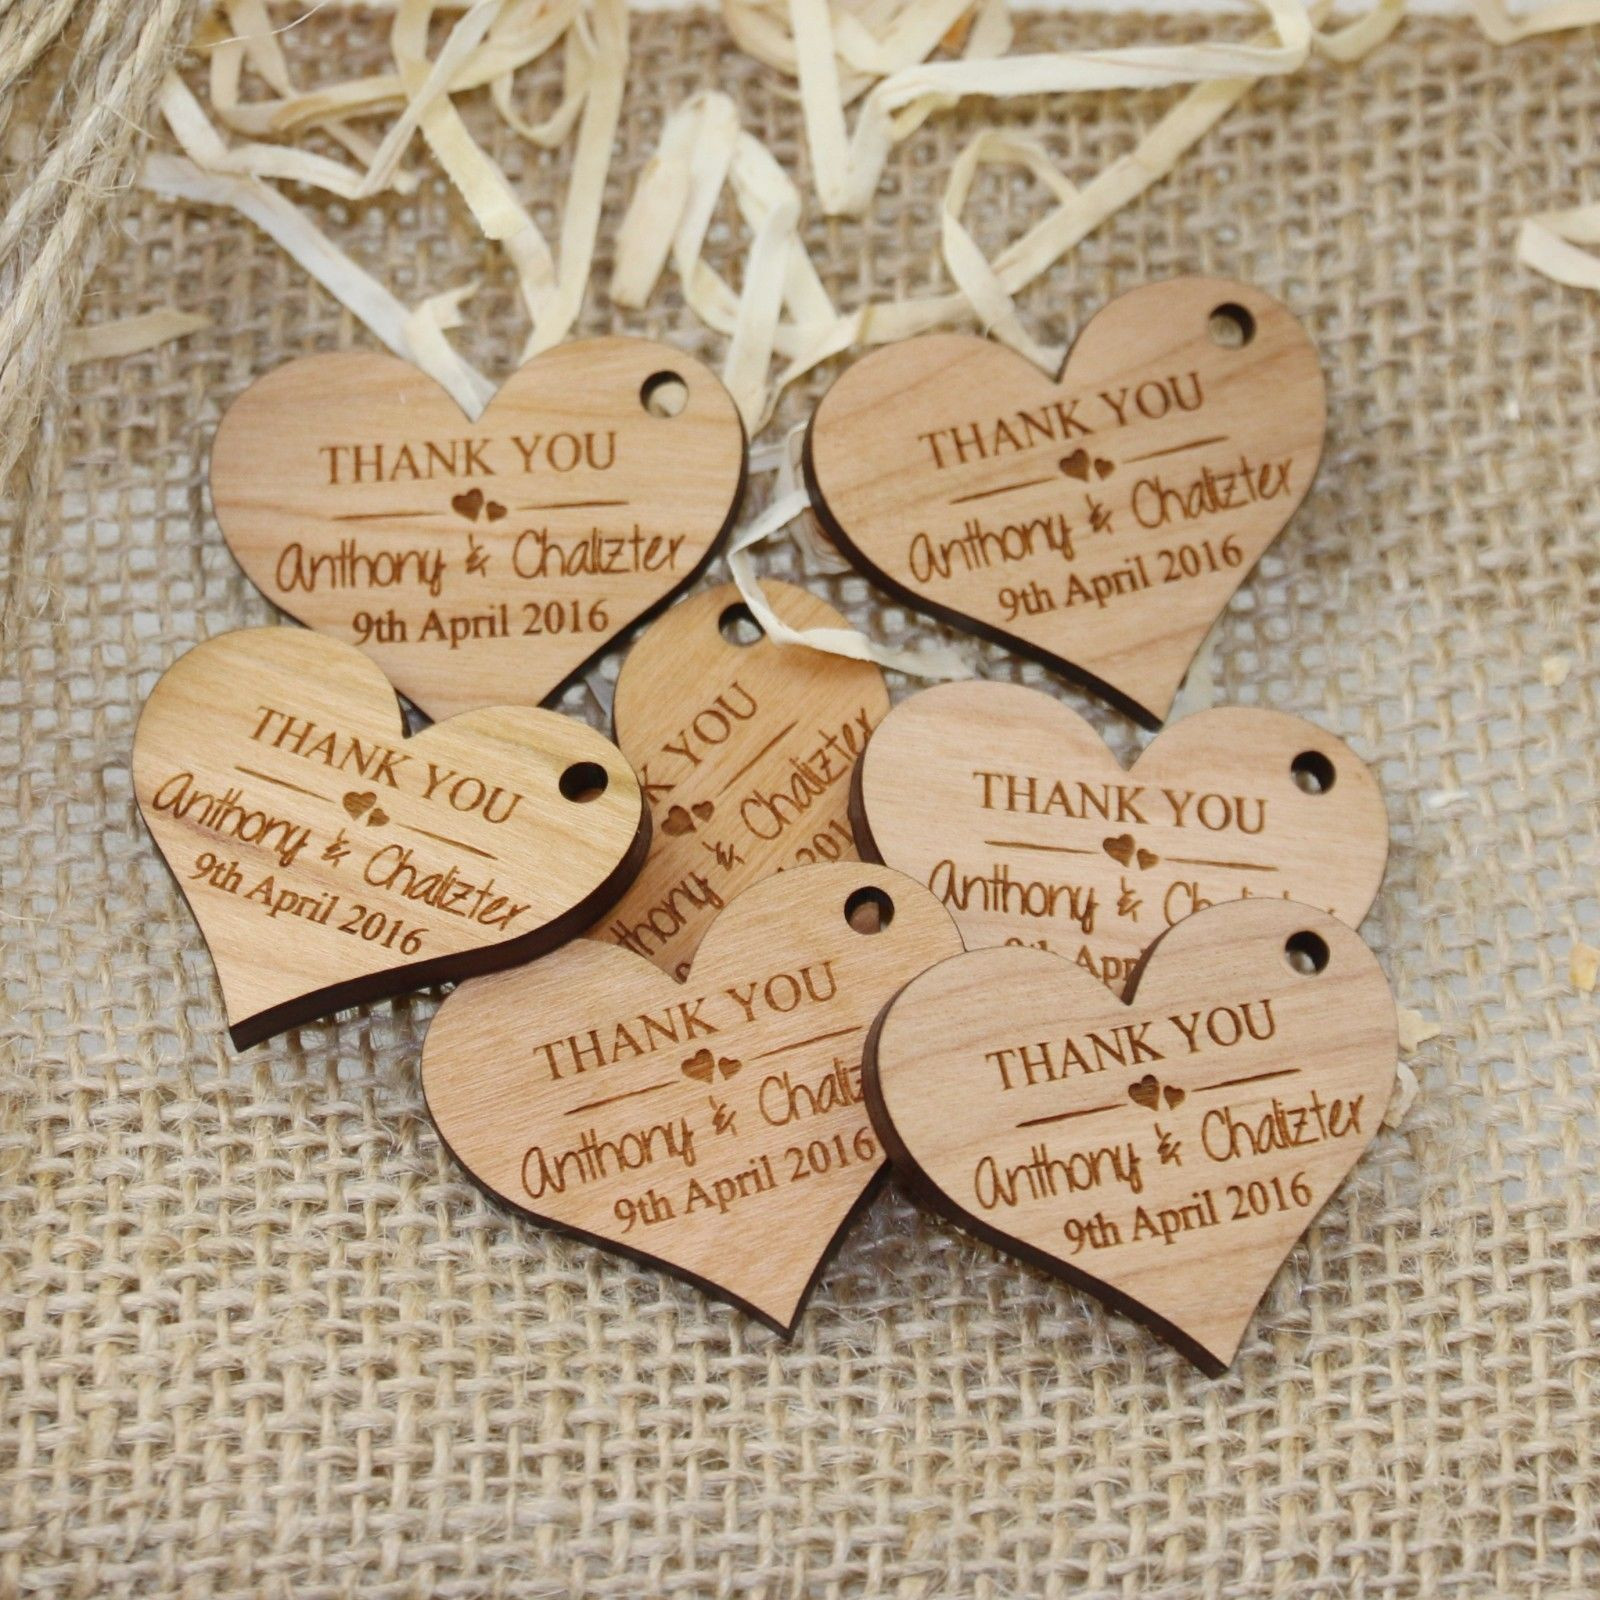 Wedding Gift Engraving Ideas
 Personalised Engraved Wooden HEART Wedding Gift Tag Wth